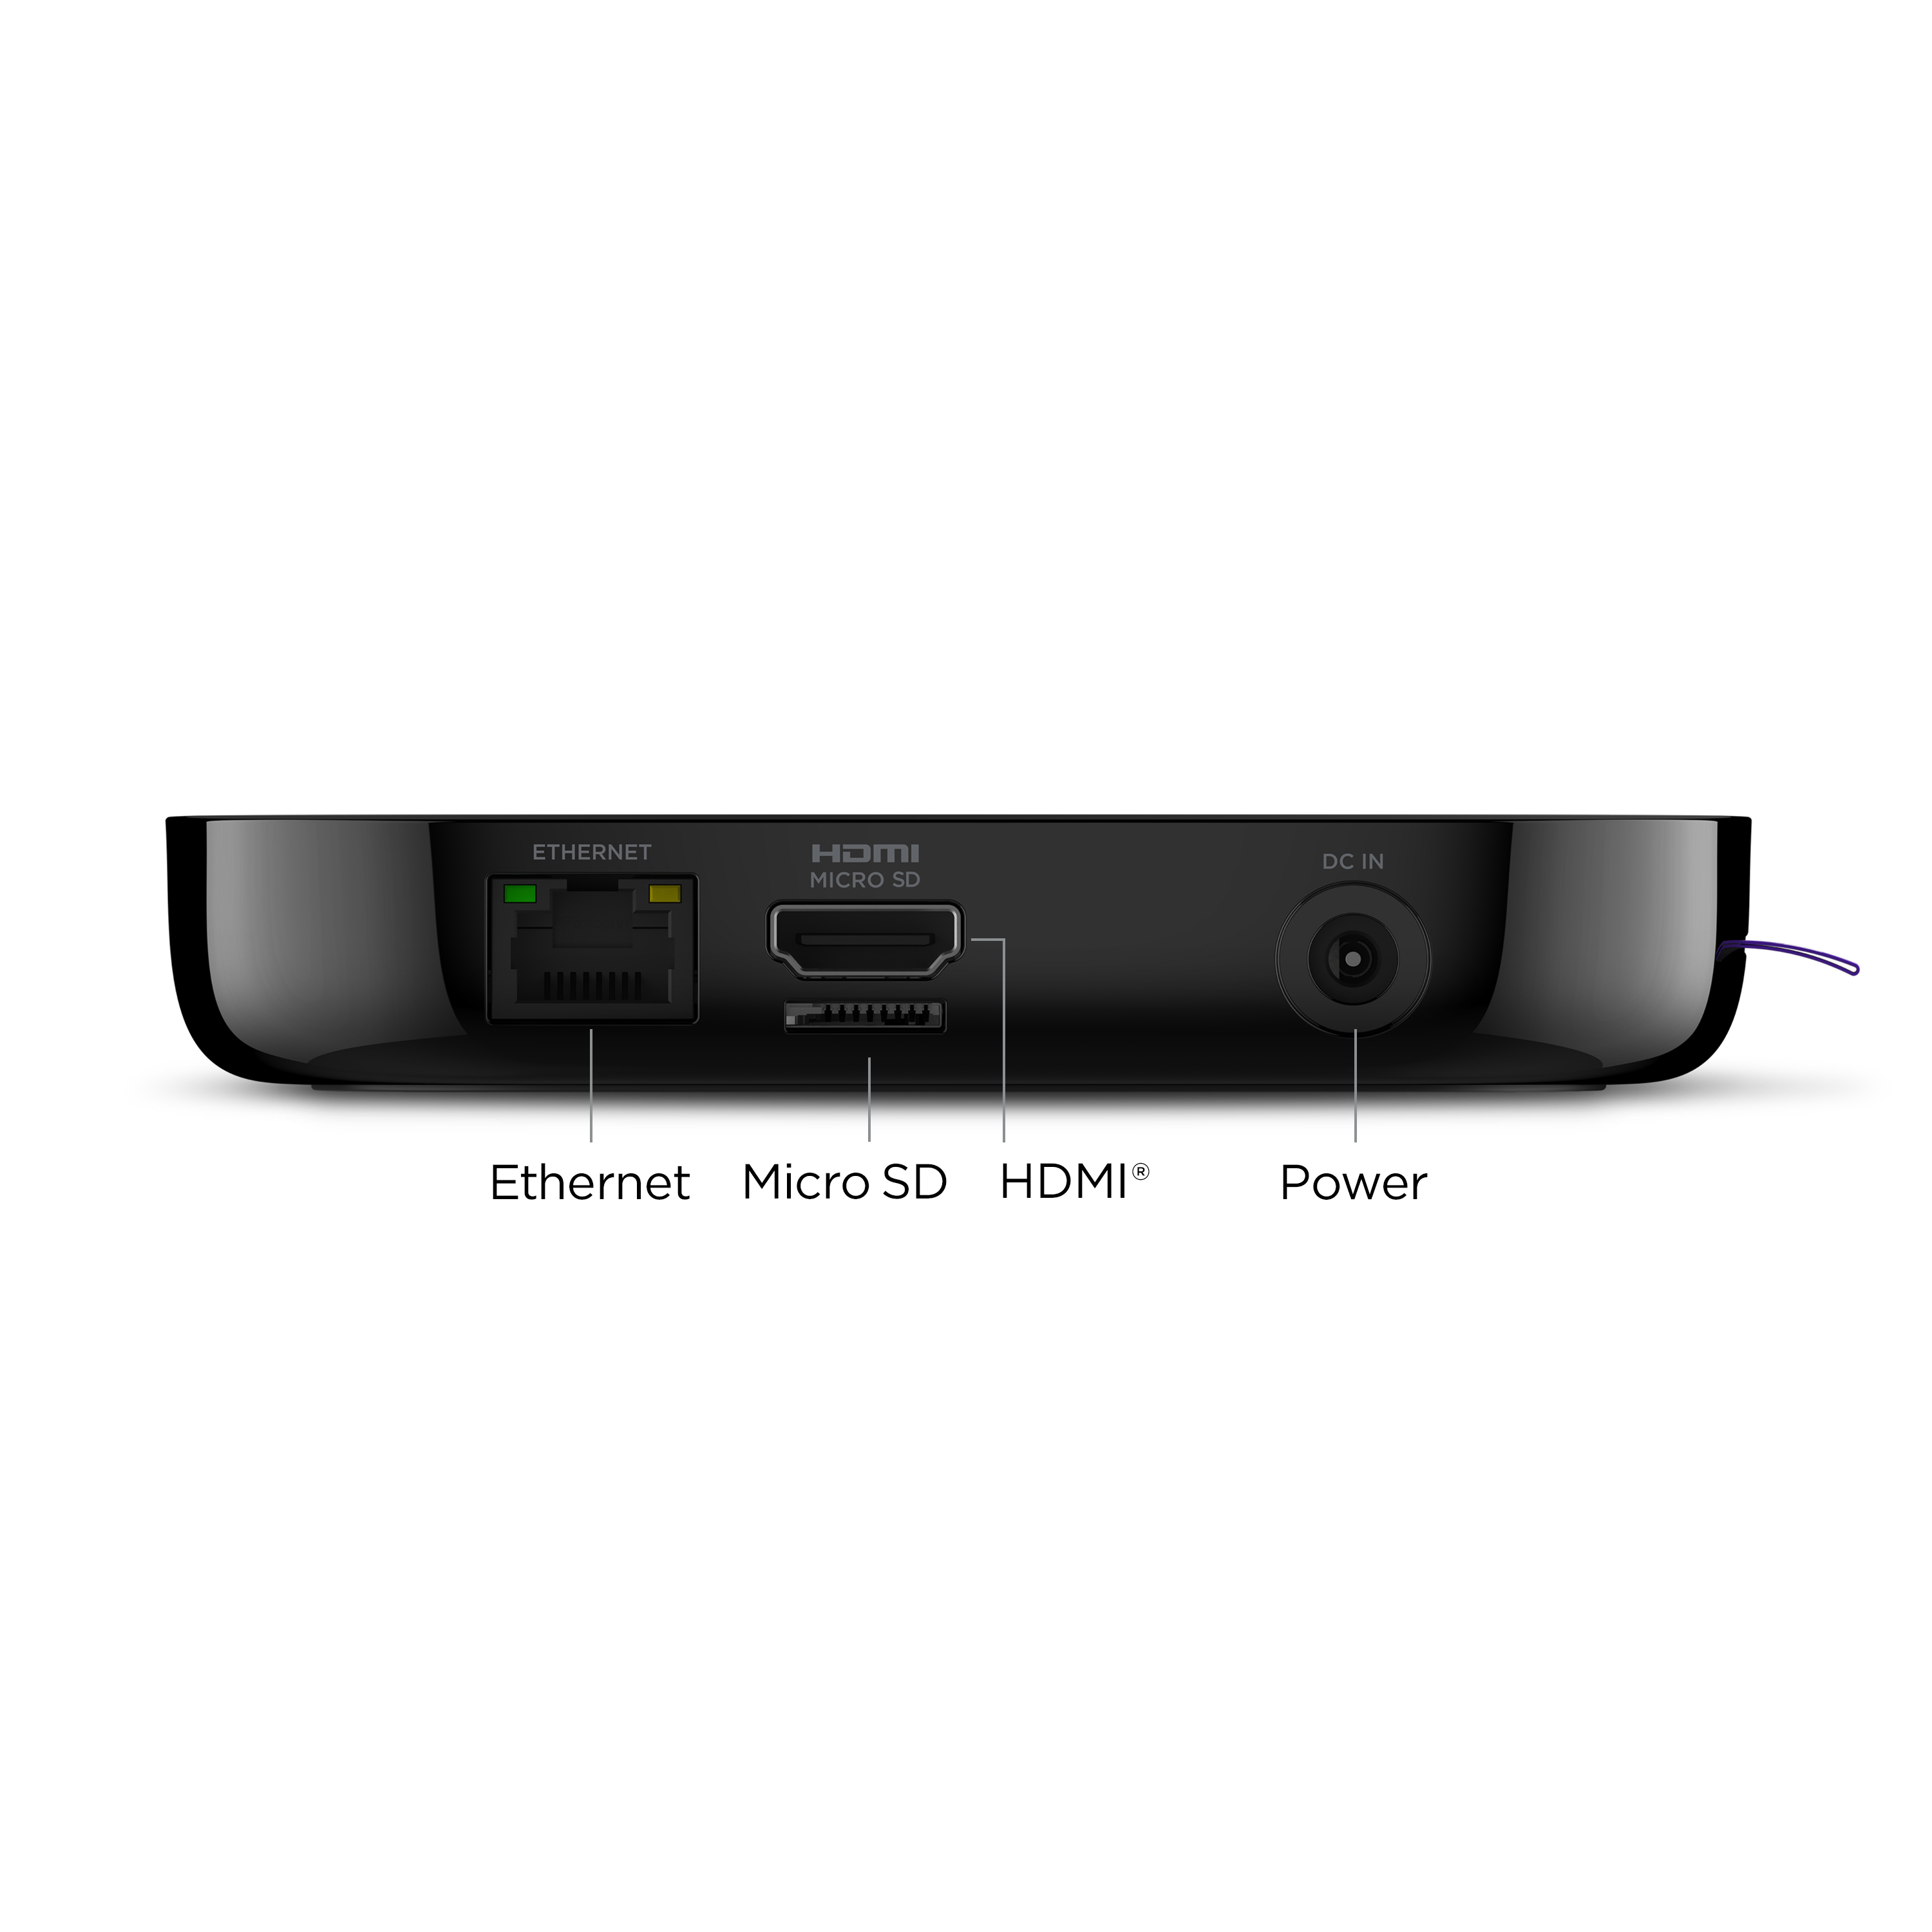 Roku Ultra LT 2019 HD/4K/HDR Streaming Device with Ethernet Port and Roku Voice Remote with Headphone Jack, includes Headphones - image 4 of 12